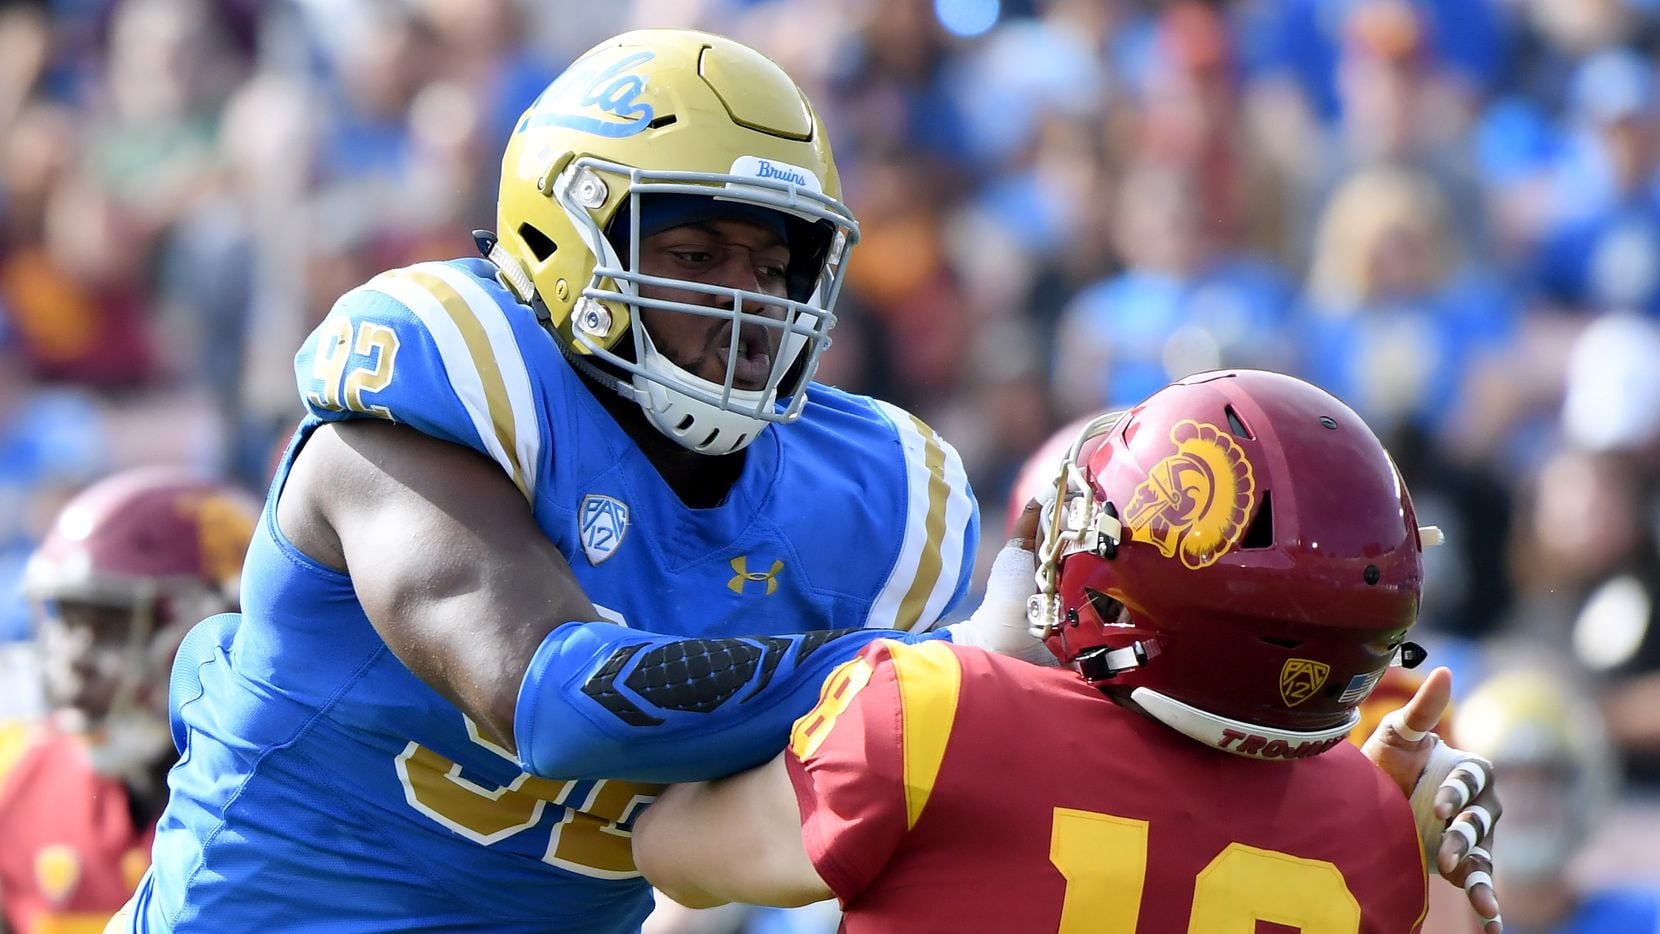 PASADENA, CALIFORNIA - NOVEMBER 17:   Osa Odighizuwa #92 of the UCLA Bruins gets his hands in the face of JT Daniels #18 of the USC Trojans during the first half at Rose Bowl on November 17, 2018 in Pasadena, California. (Photo by Harry How/Getty Images)